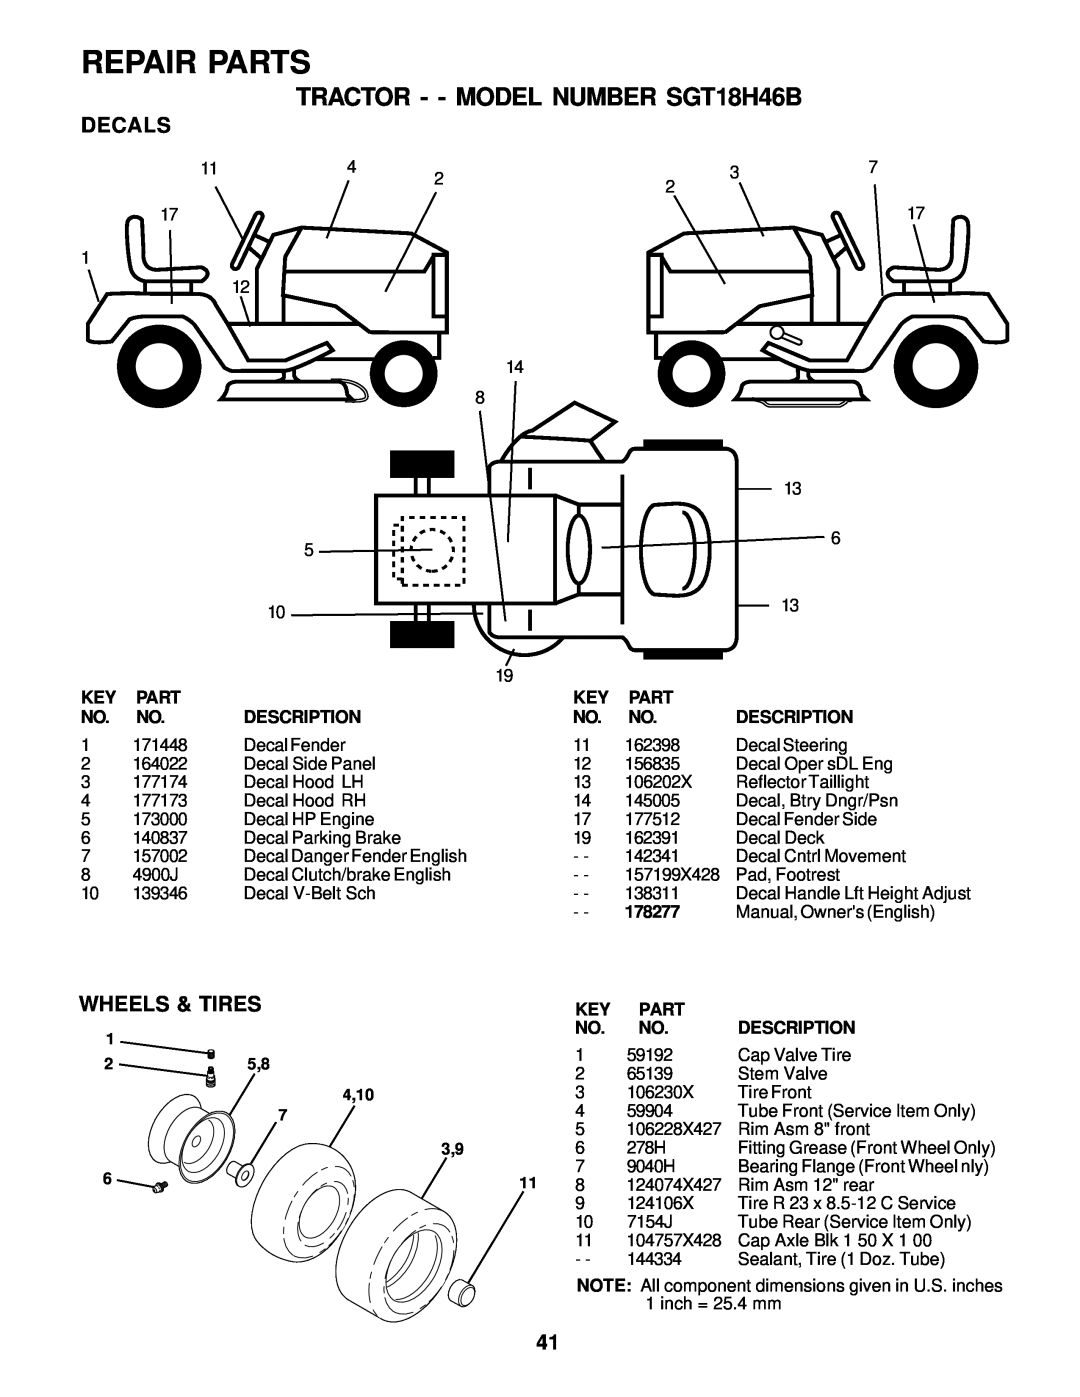 Weed Eater 178277 owner manual Decals, Wheels & Tires, Repair Parts, TRACTOR - - MODEL NUMBER SGT18H46B, 4,10 